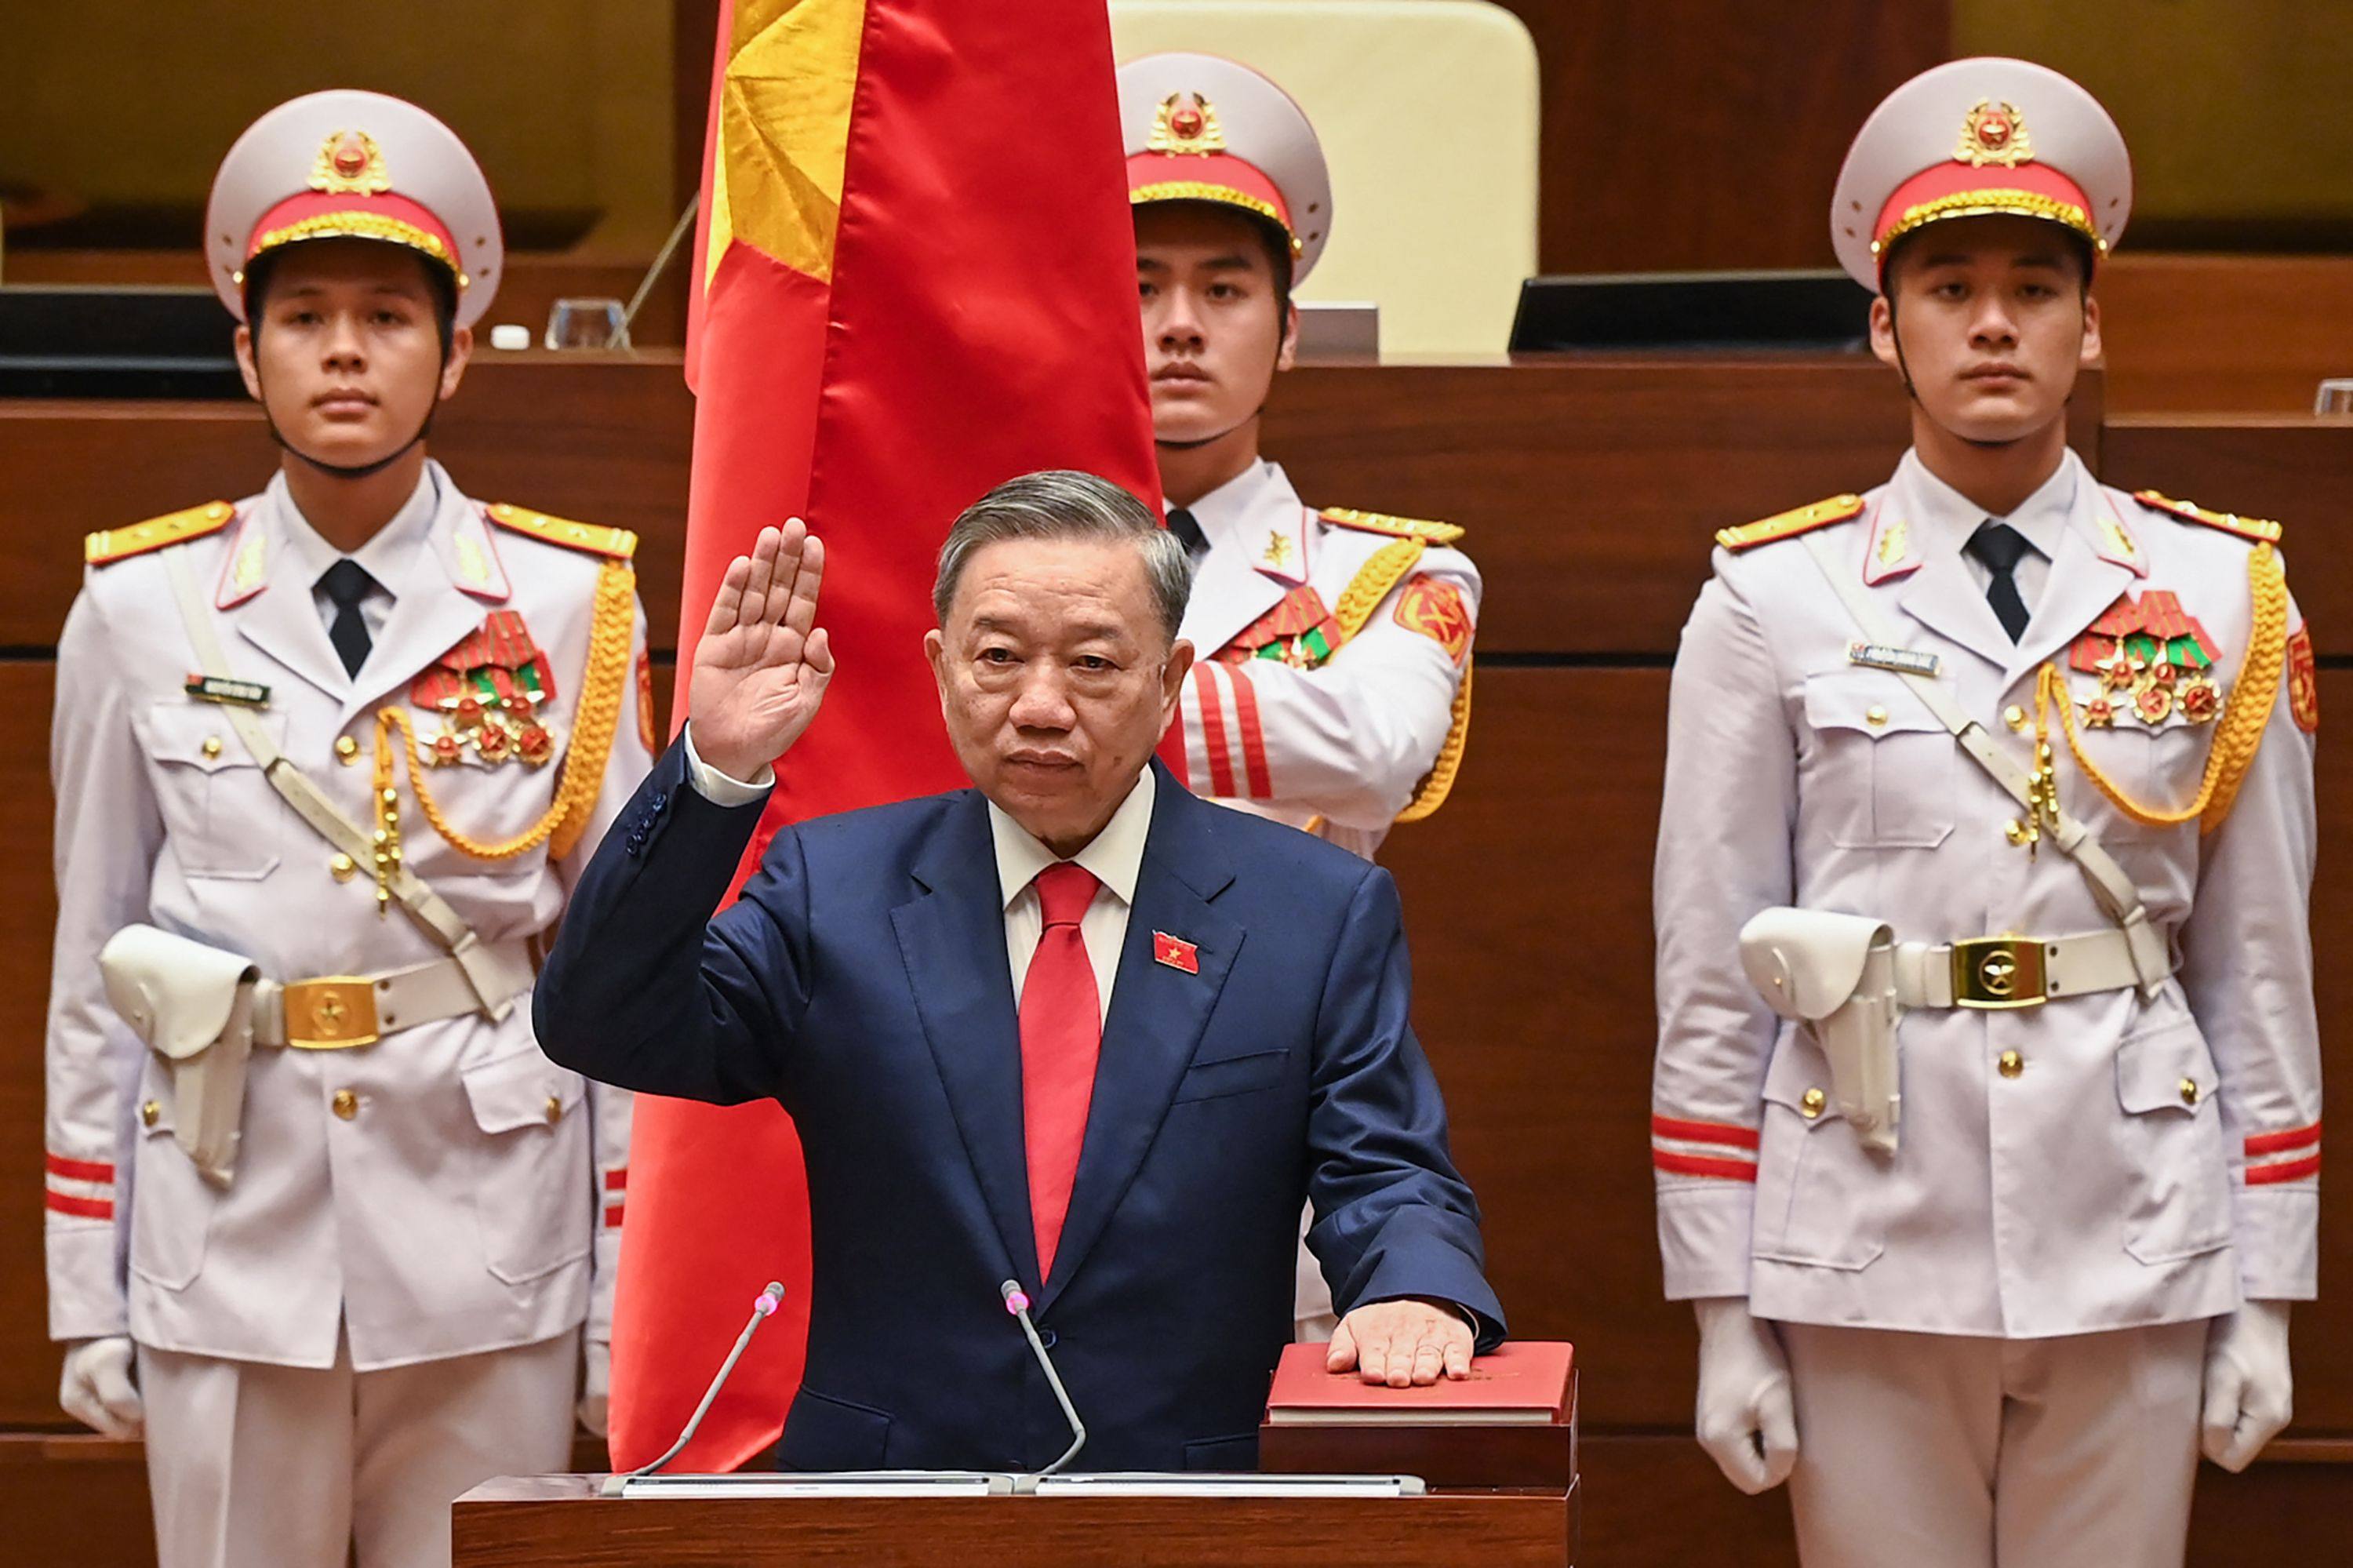 To Lam takes his oath to become Vietnam’s next president during the National Assembly’s summer session in Hanoi on May 22. Photo: AFP